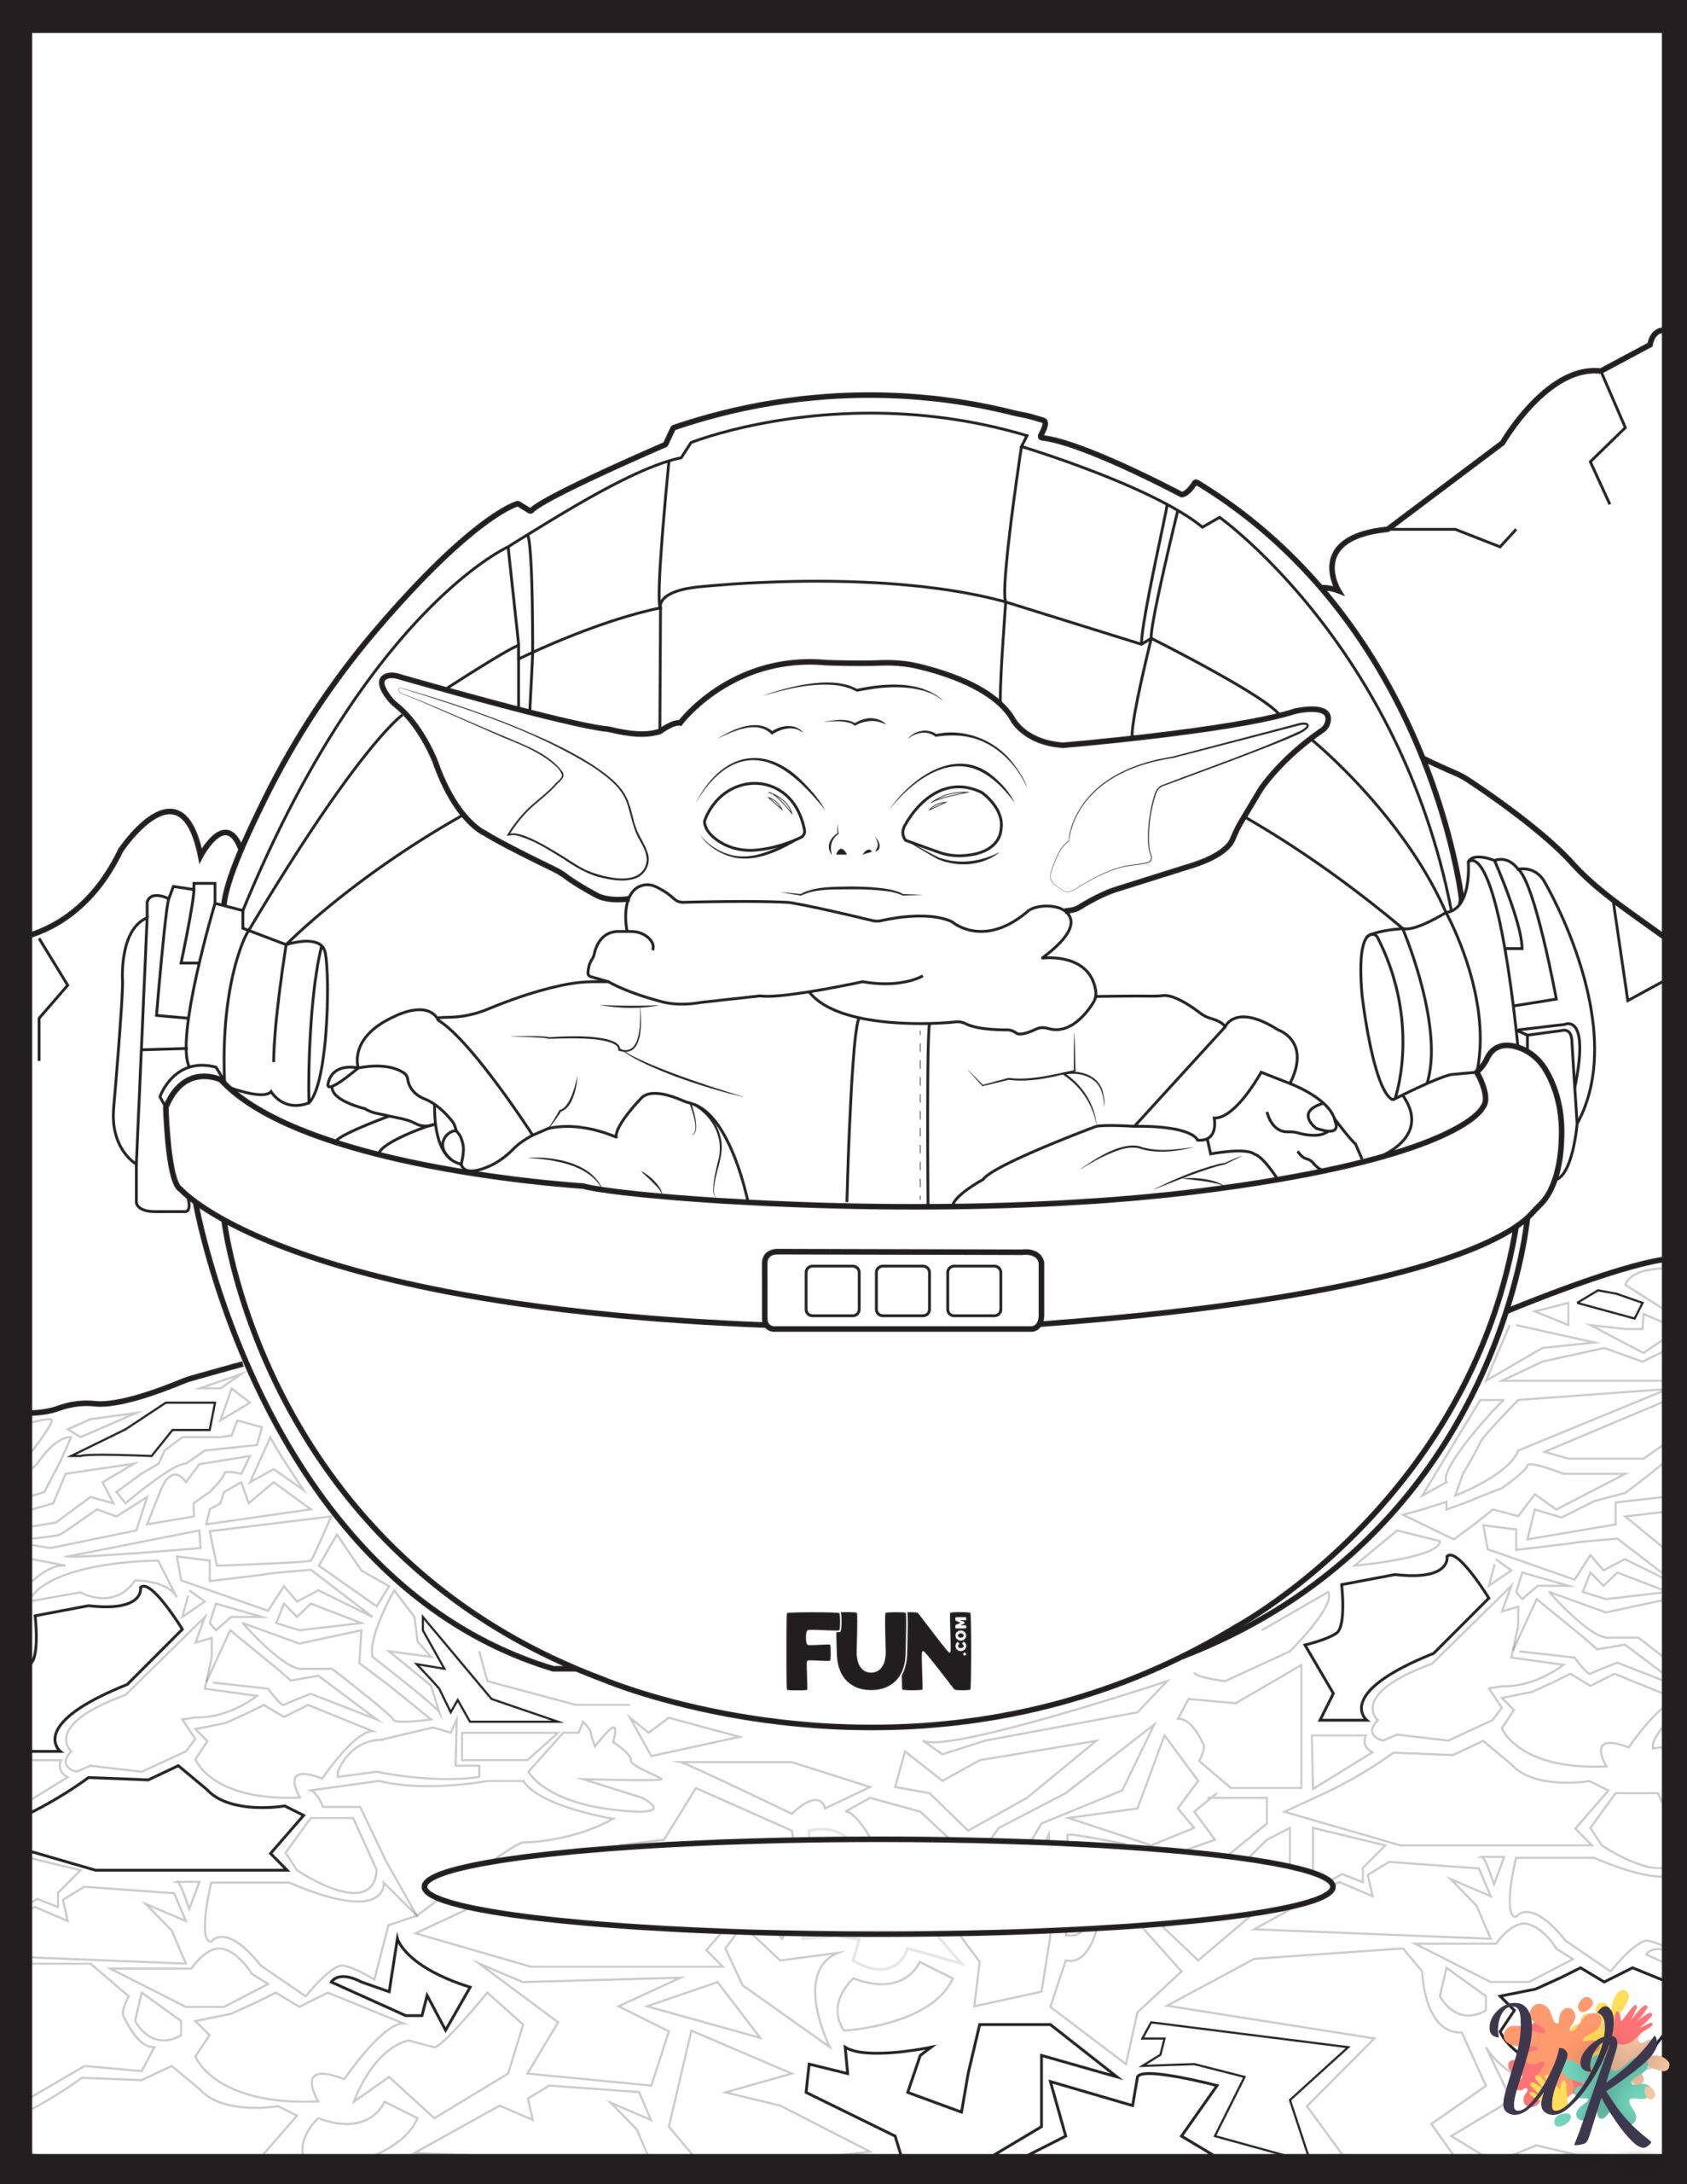 Star Wars coloring pages free